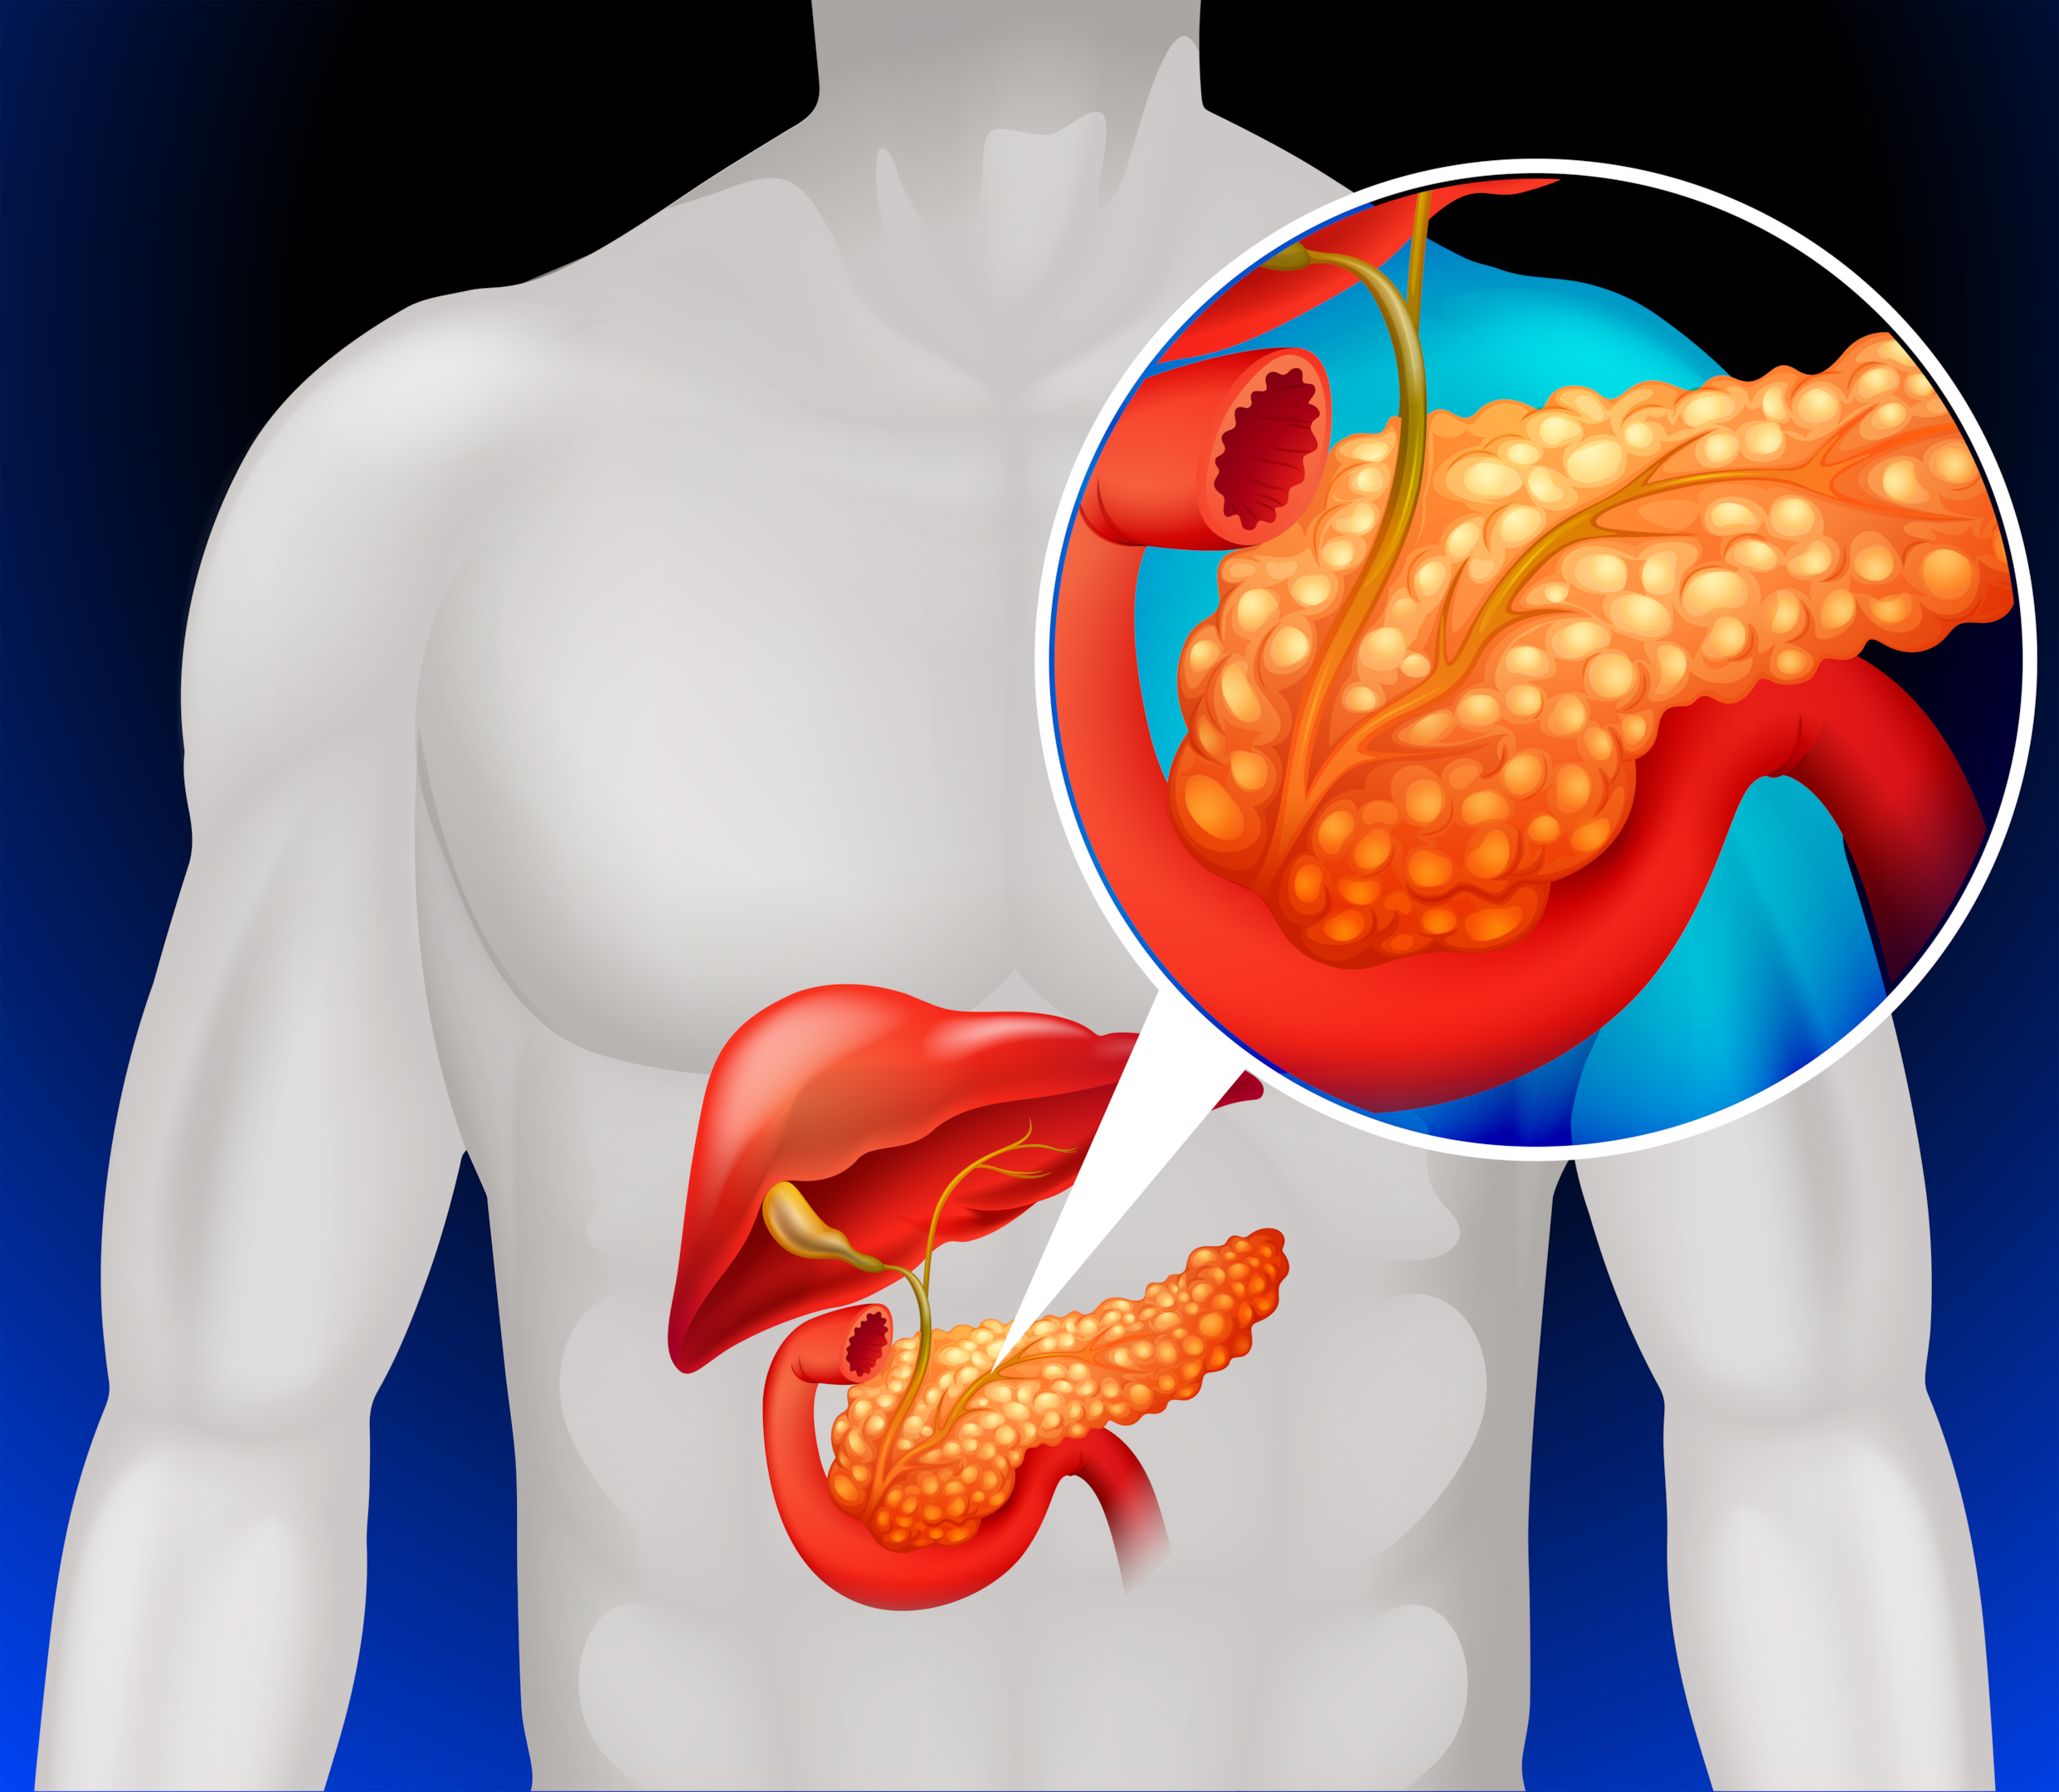 A healthy digestive system needs a healthy pancreas.